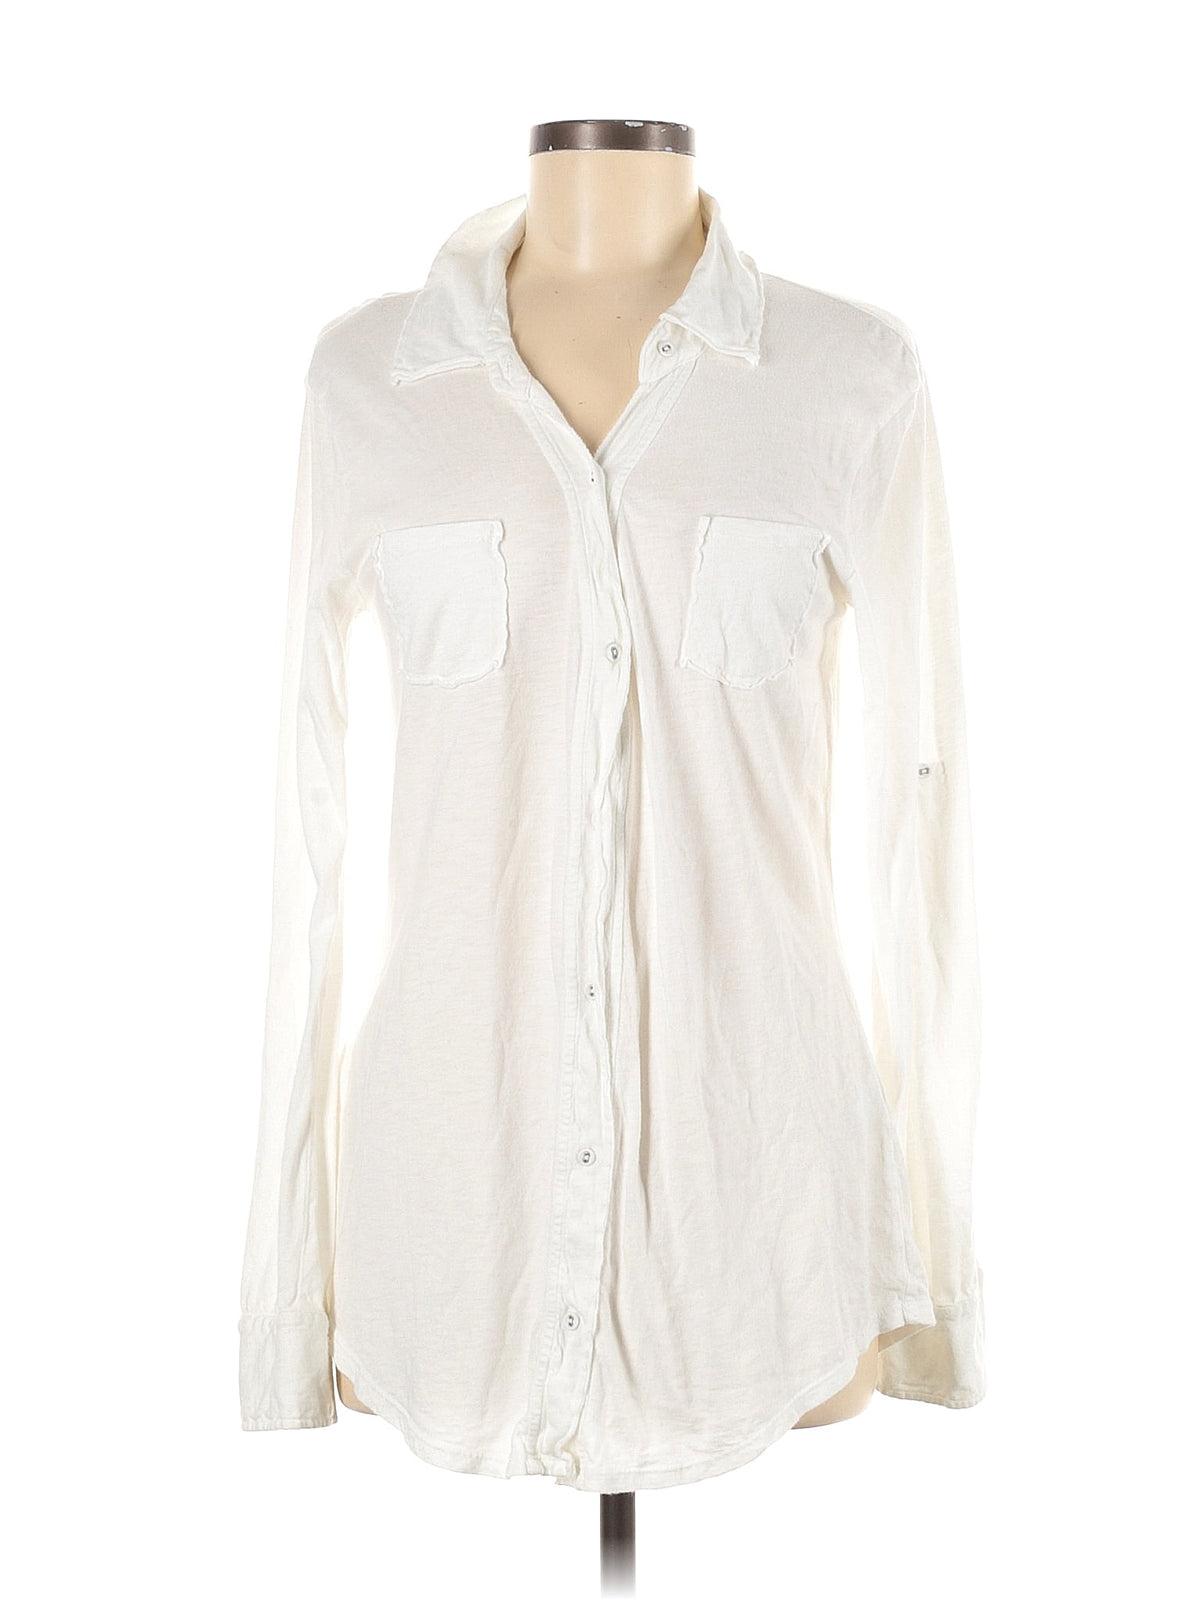 Long Sleeve Button Down Shirt size - One Size